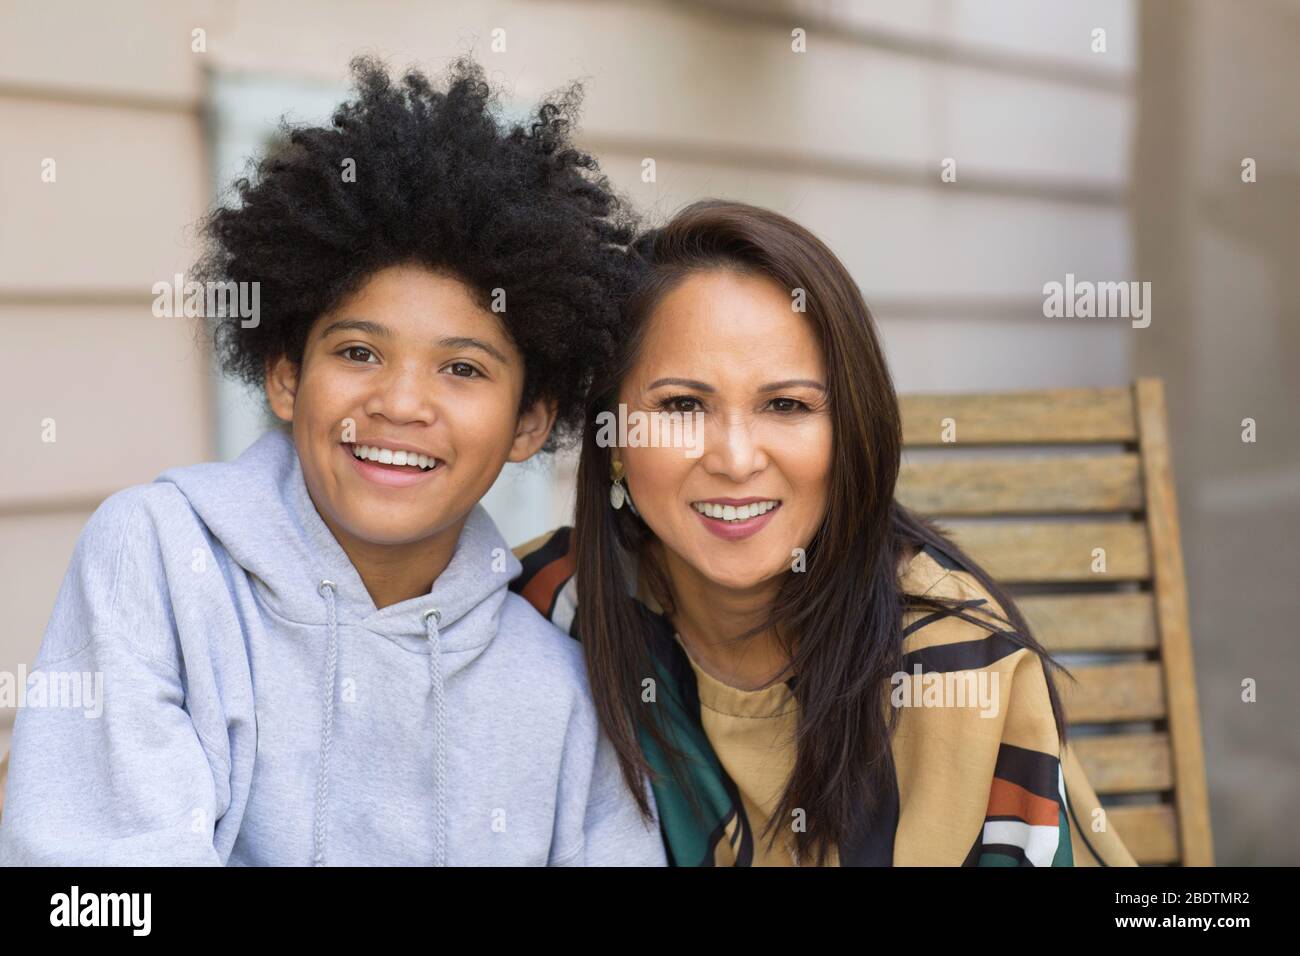 Portrait of an Asian mother with her teenage son. Stock Photo